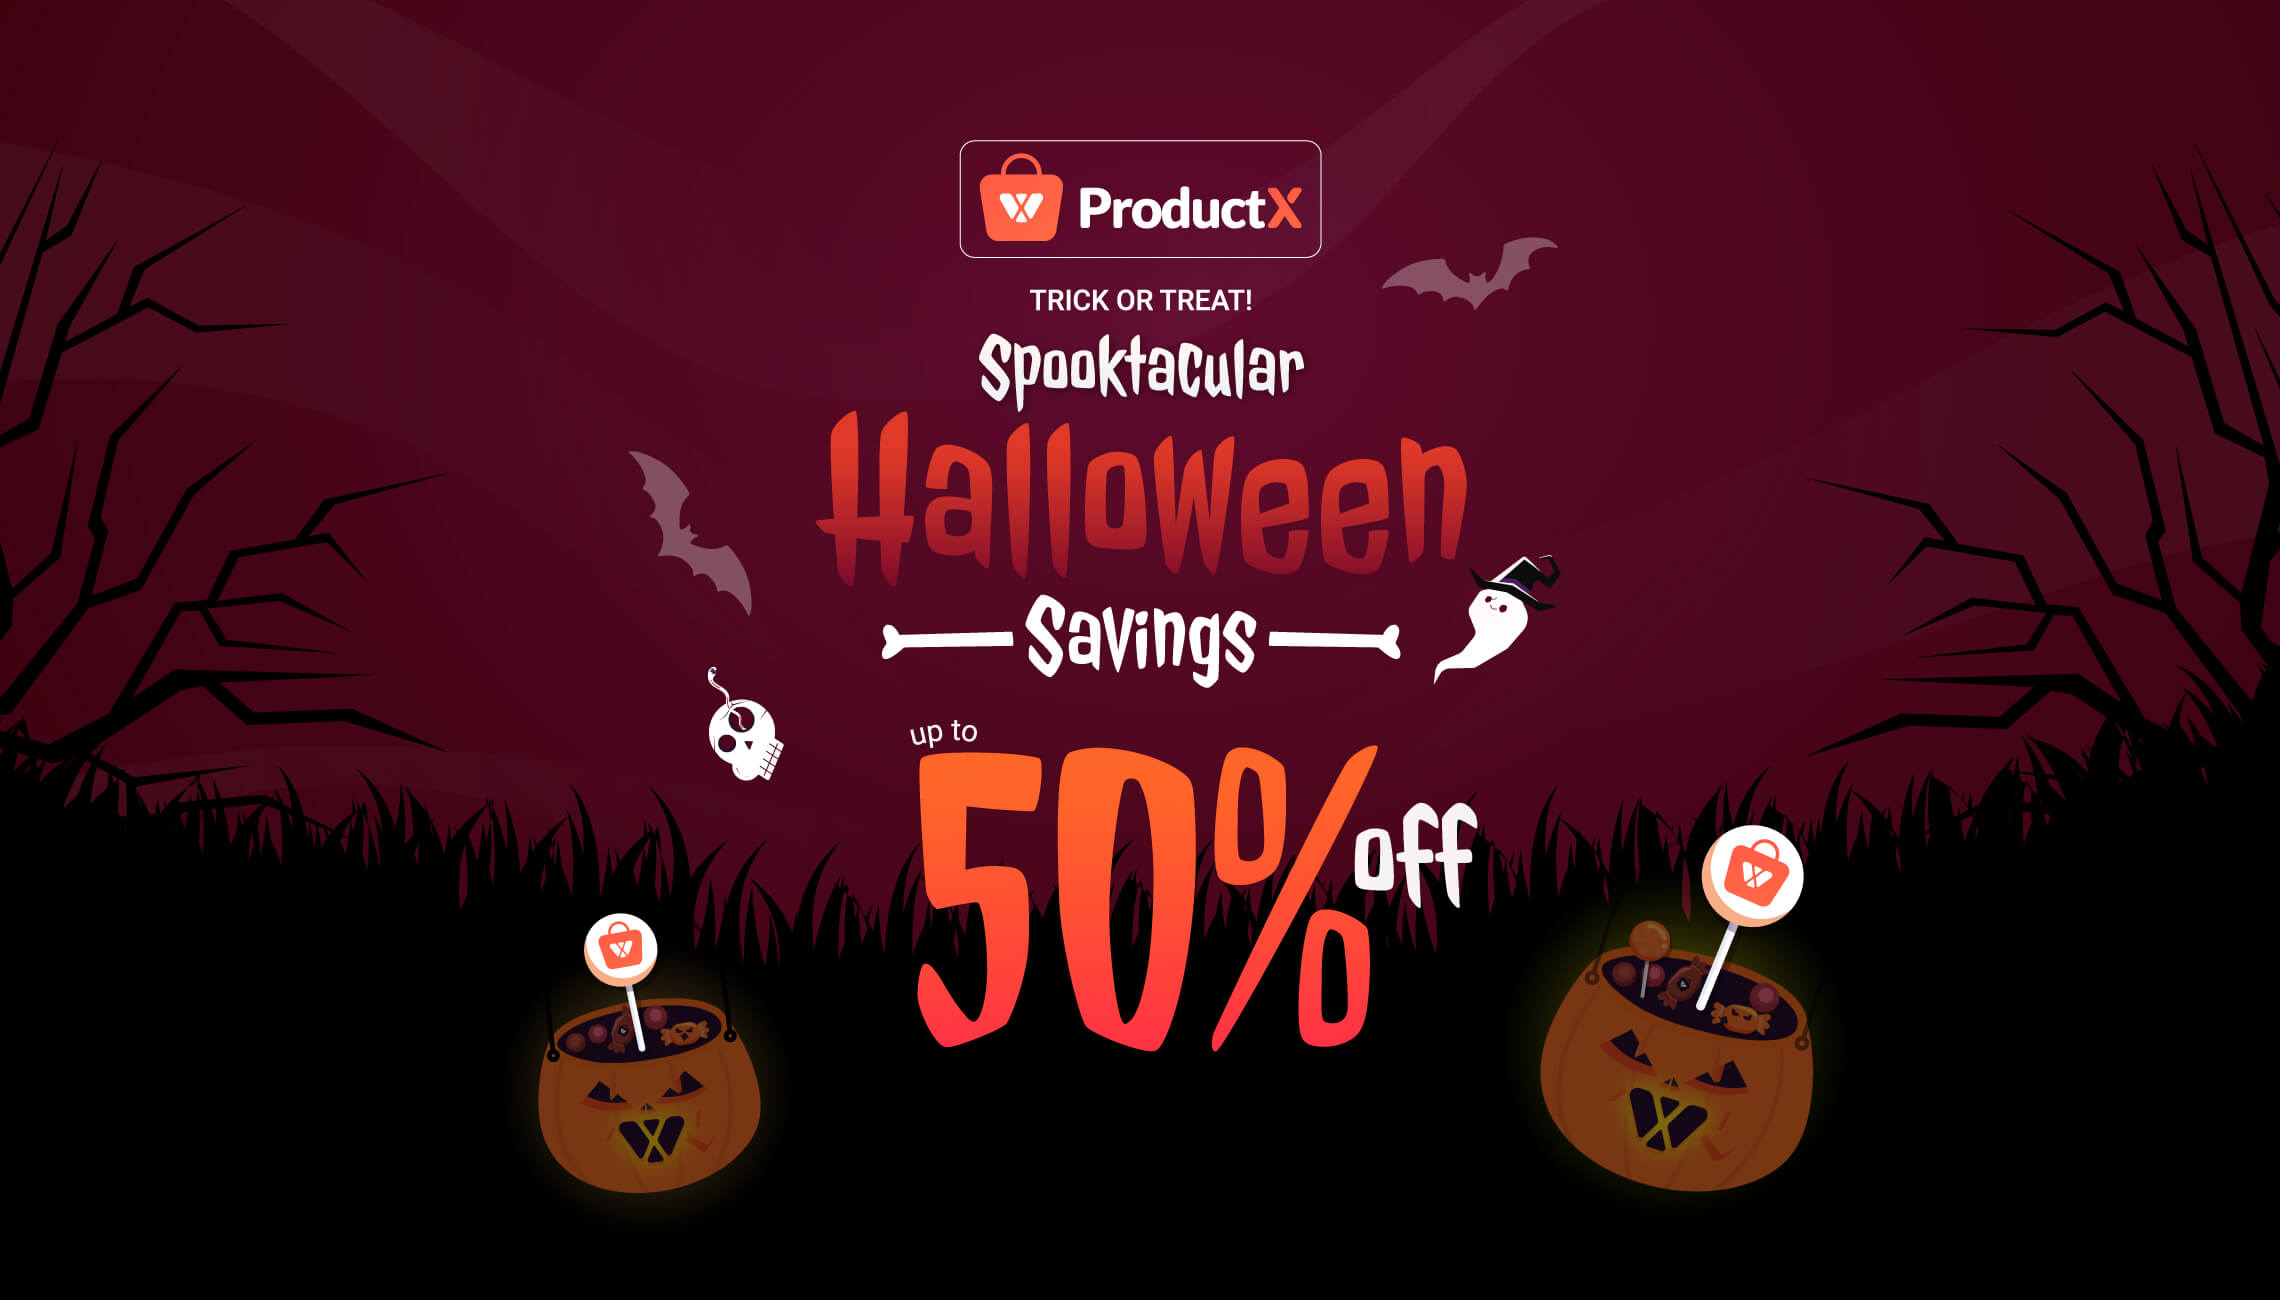 ProductX halloween offers